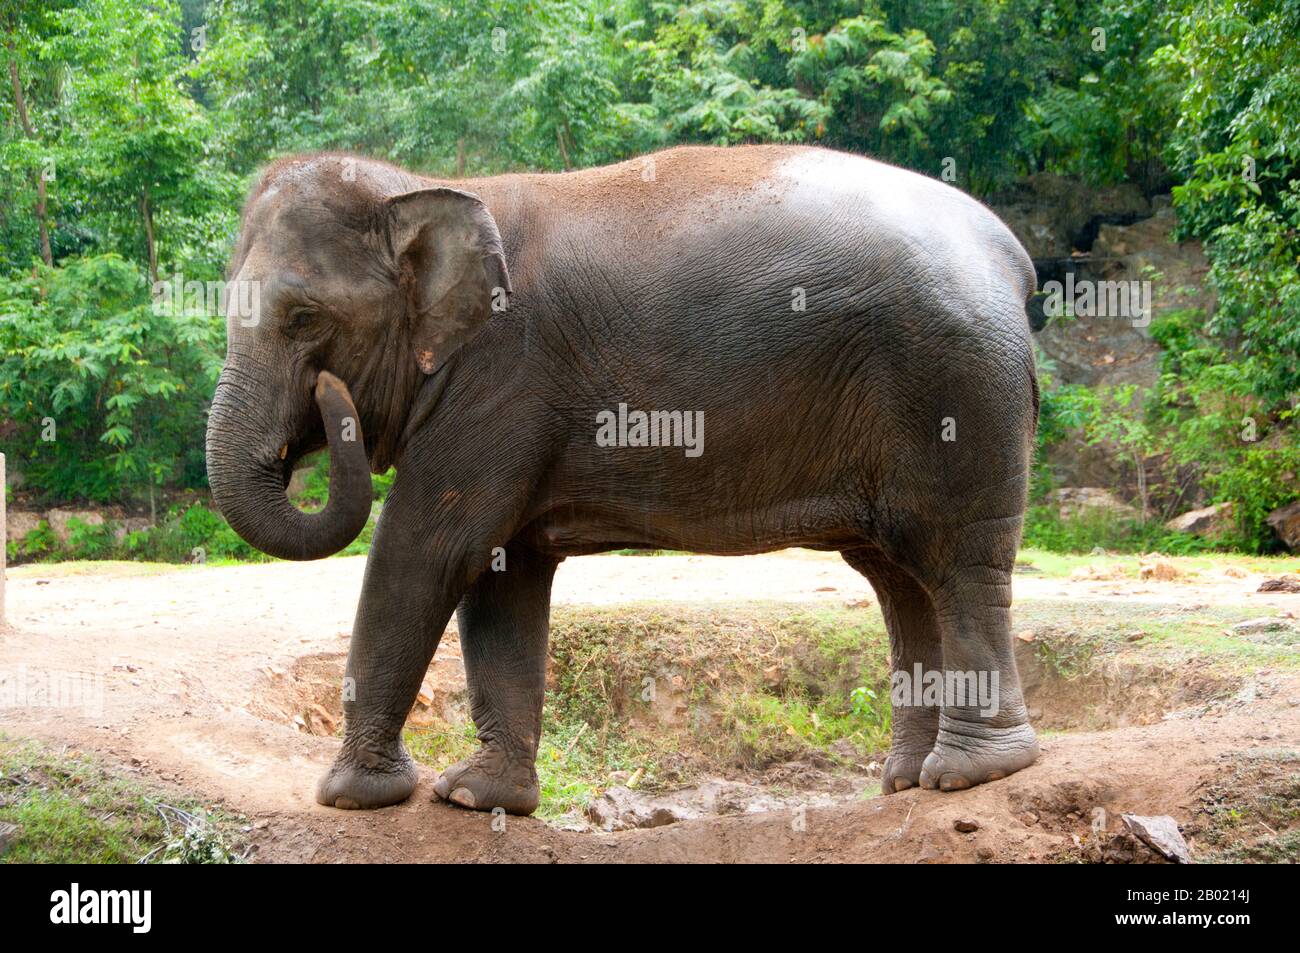 The Asian or Asiatic Elephant (Elephas maximus) is the only living species  of the genus Elephas and is distributed throughout the Subcontinent and  Southeast Asia from India in the west to Borneo